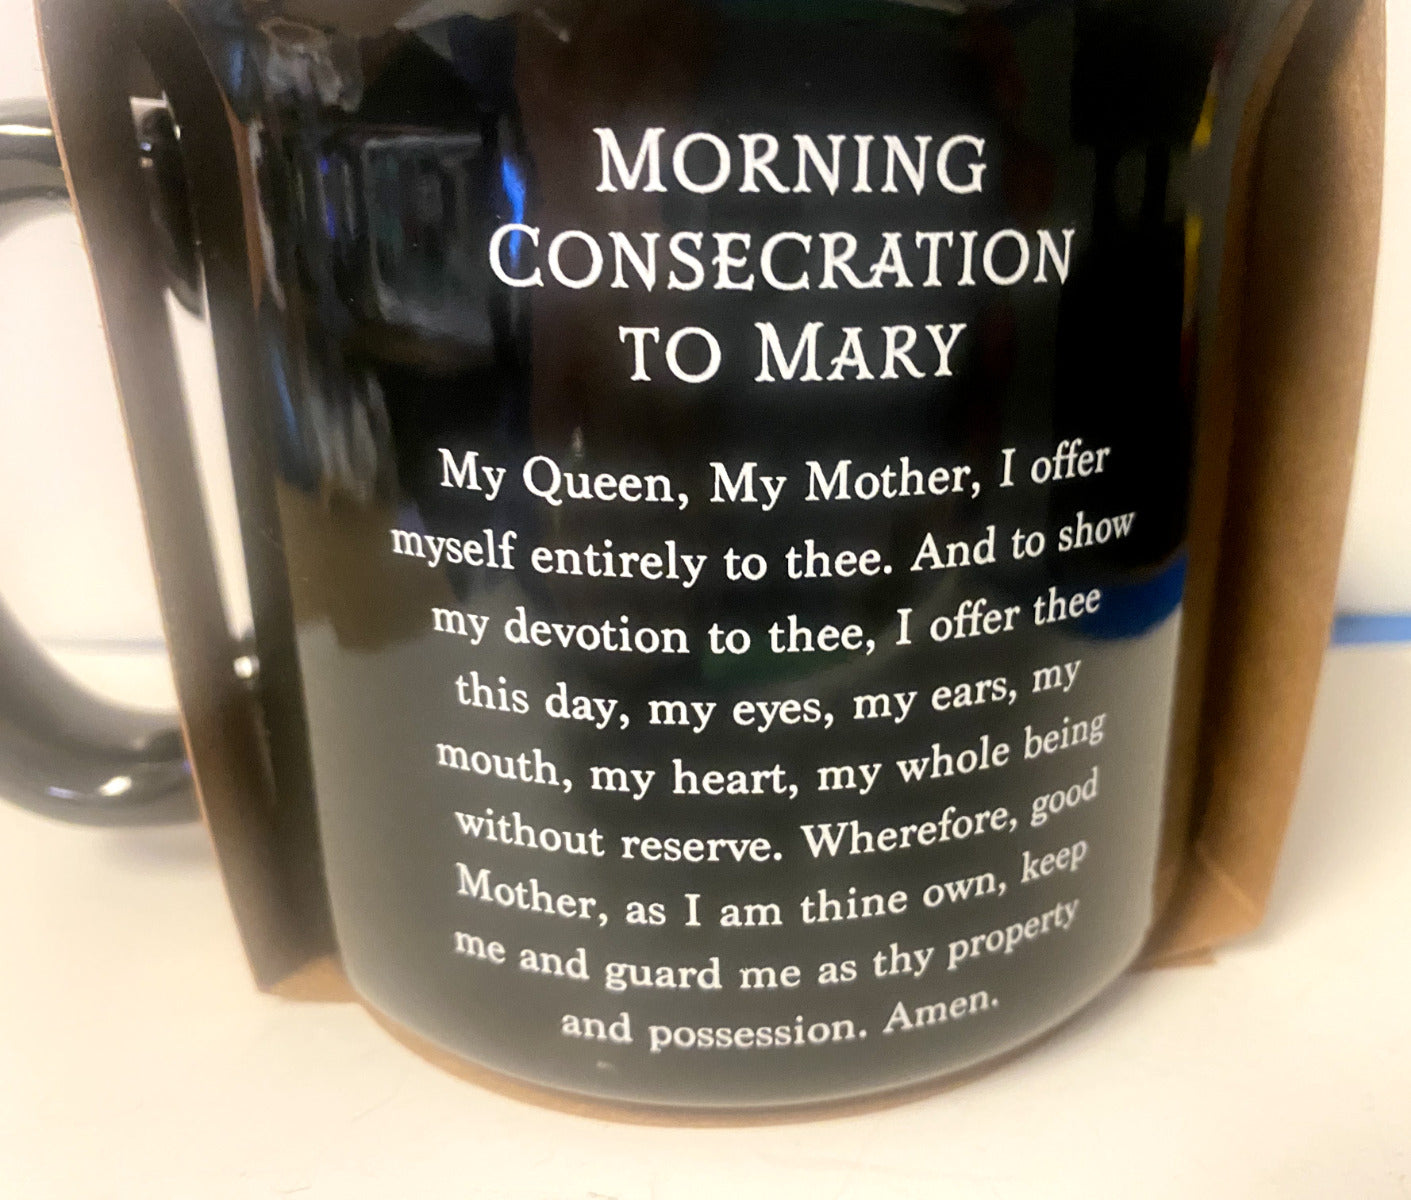 Immaculate Heart of Mary 13 oz. Cup/Mug with prayer, New #053 - Bob and Penny Lord